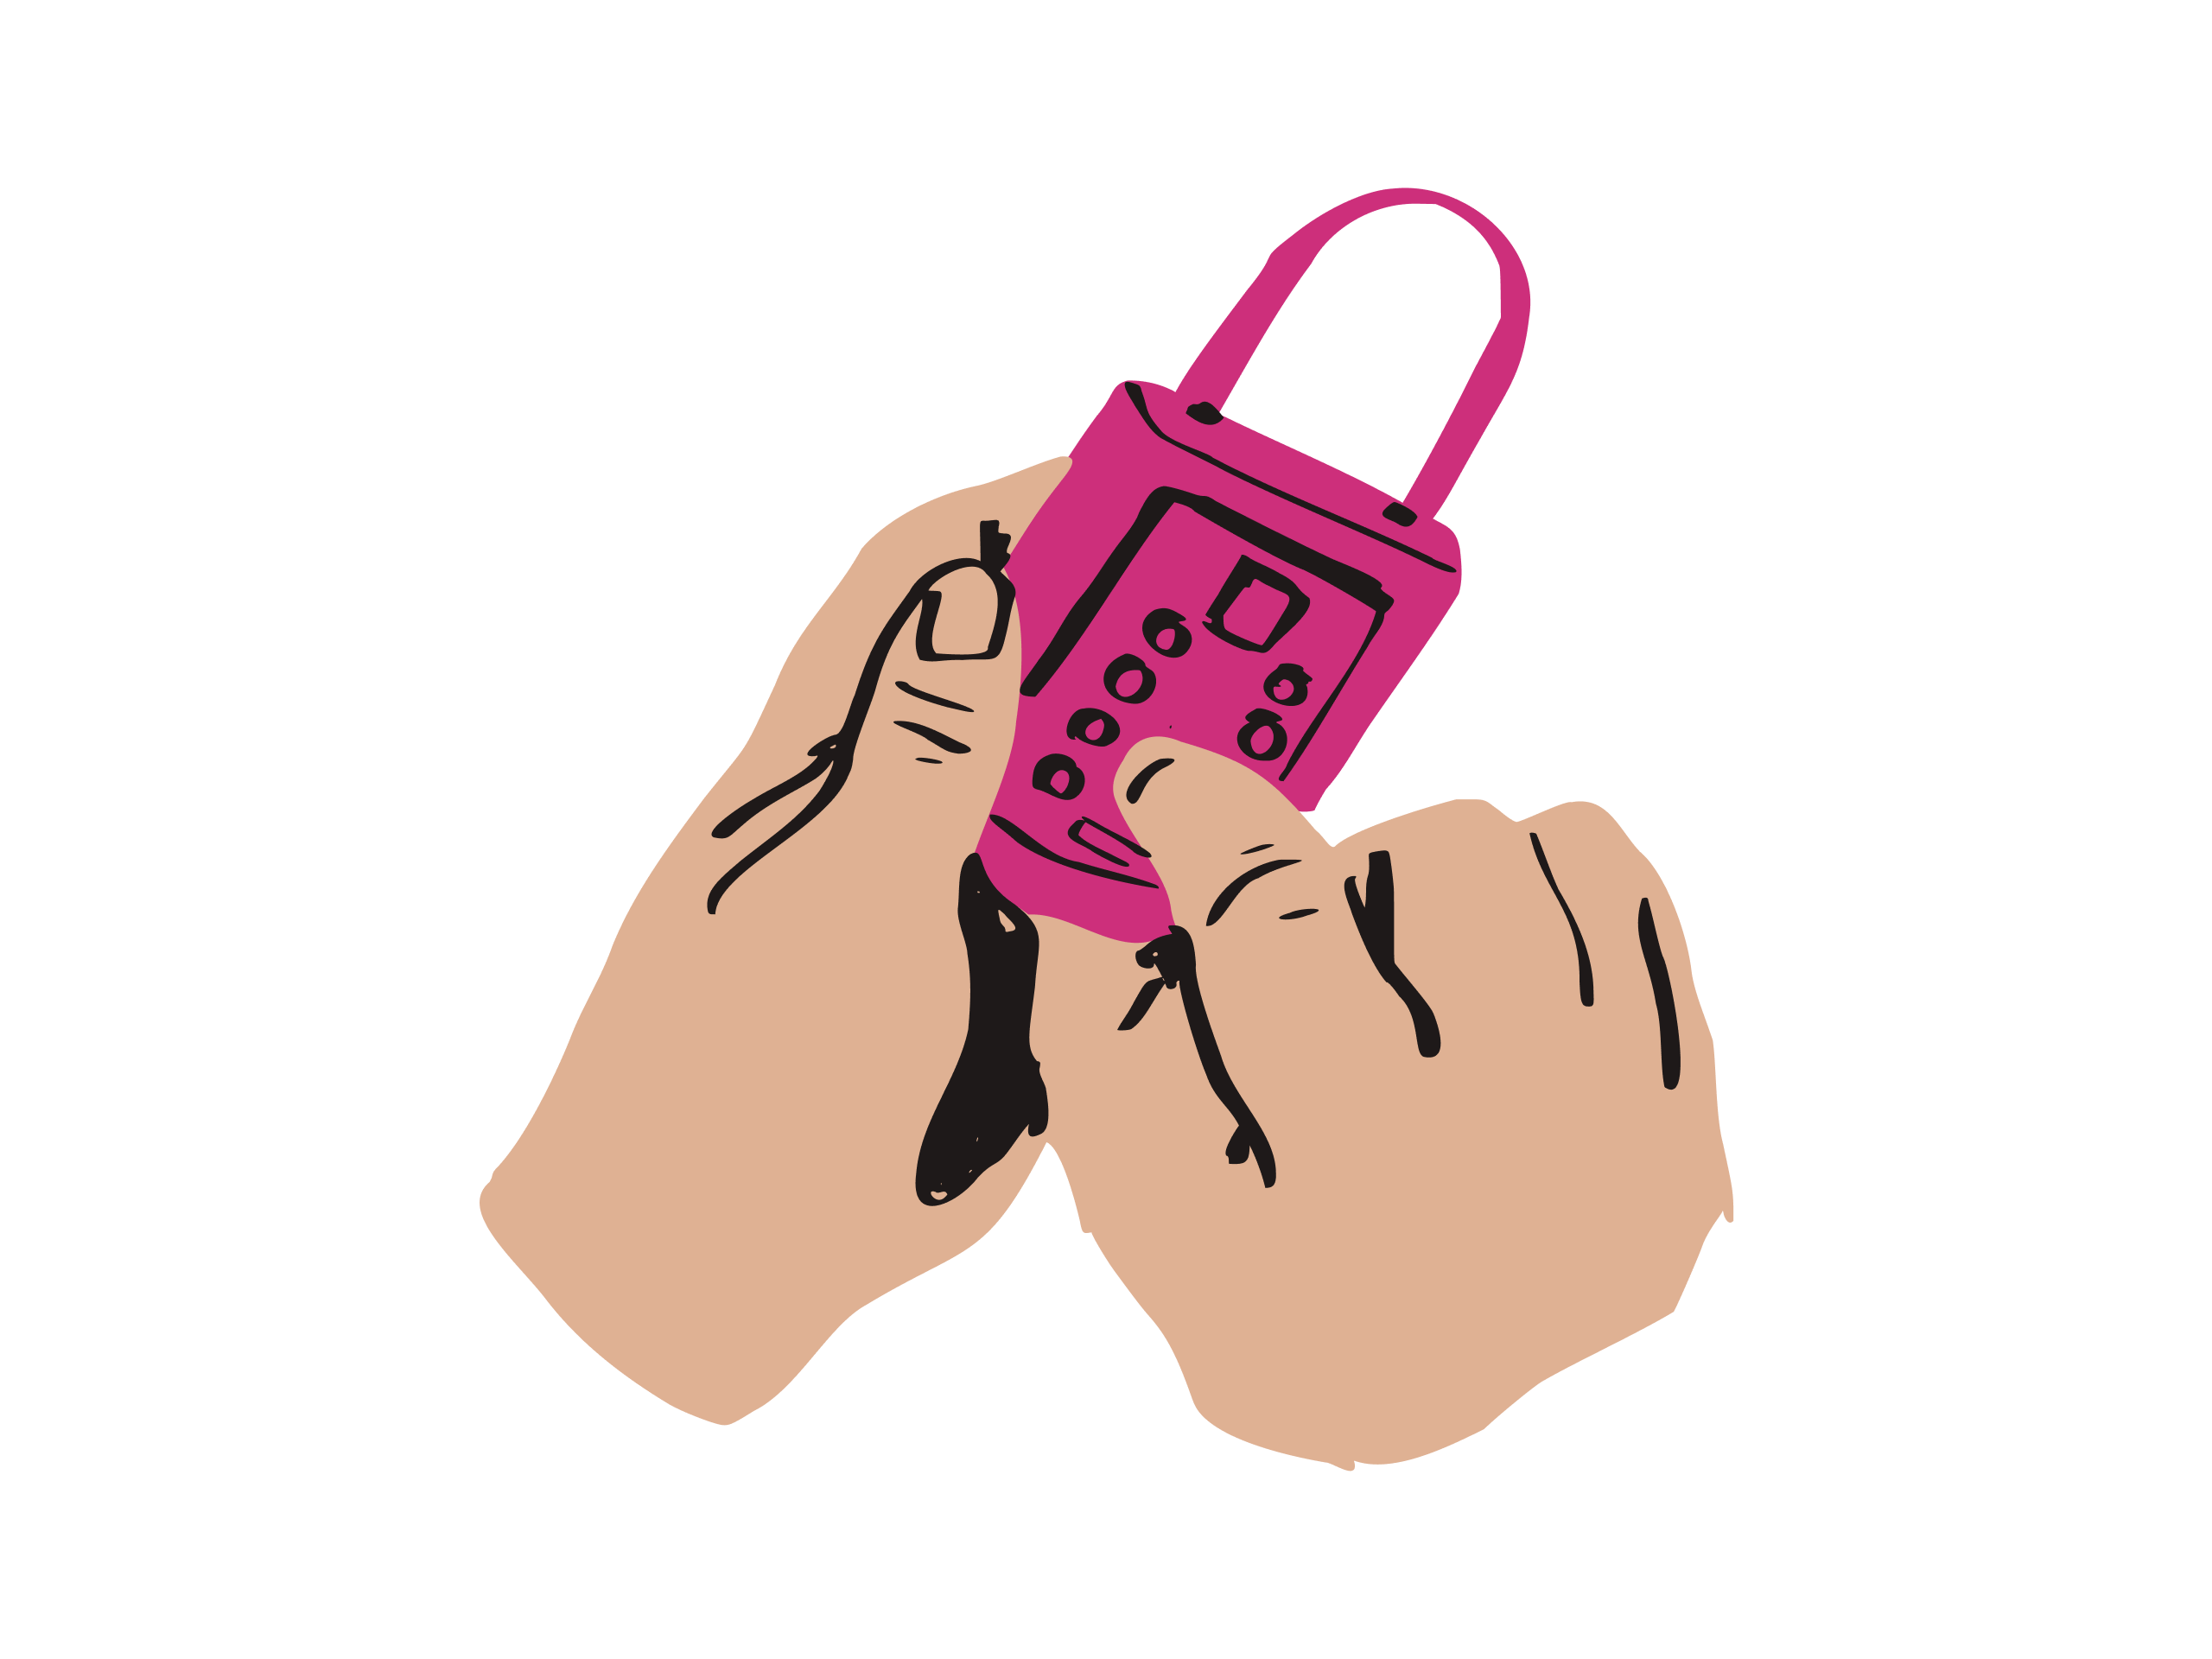 An illustration of hands entering combination on a padlock